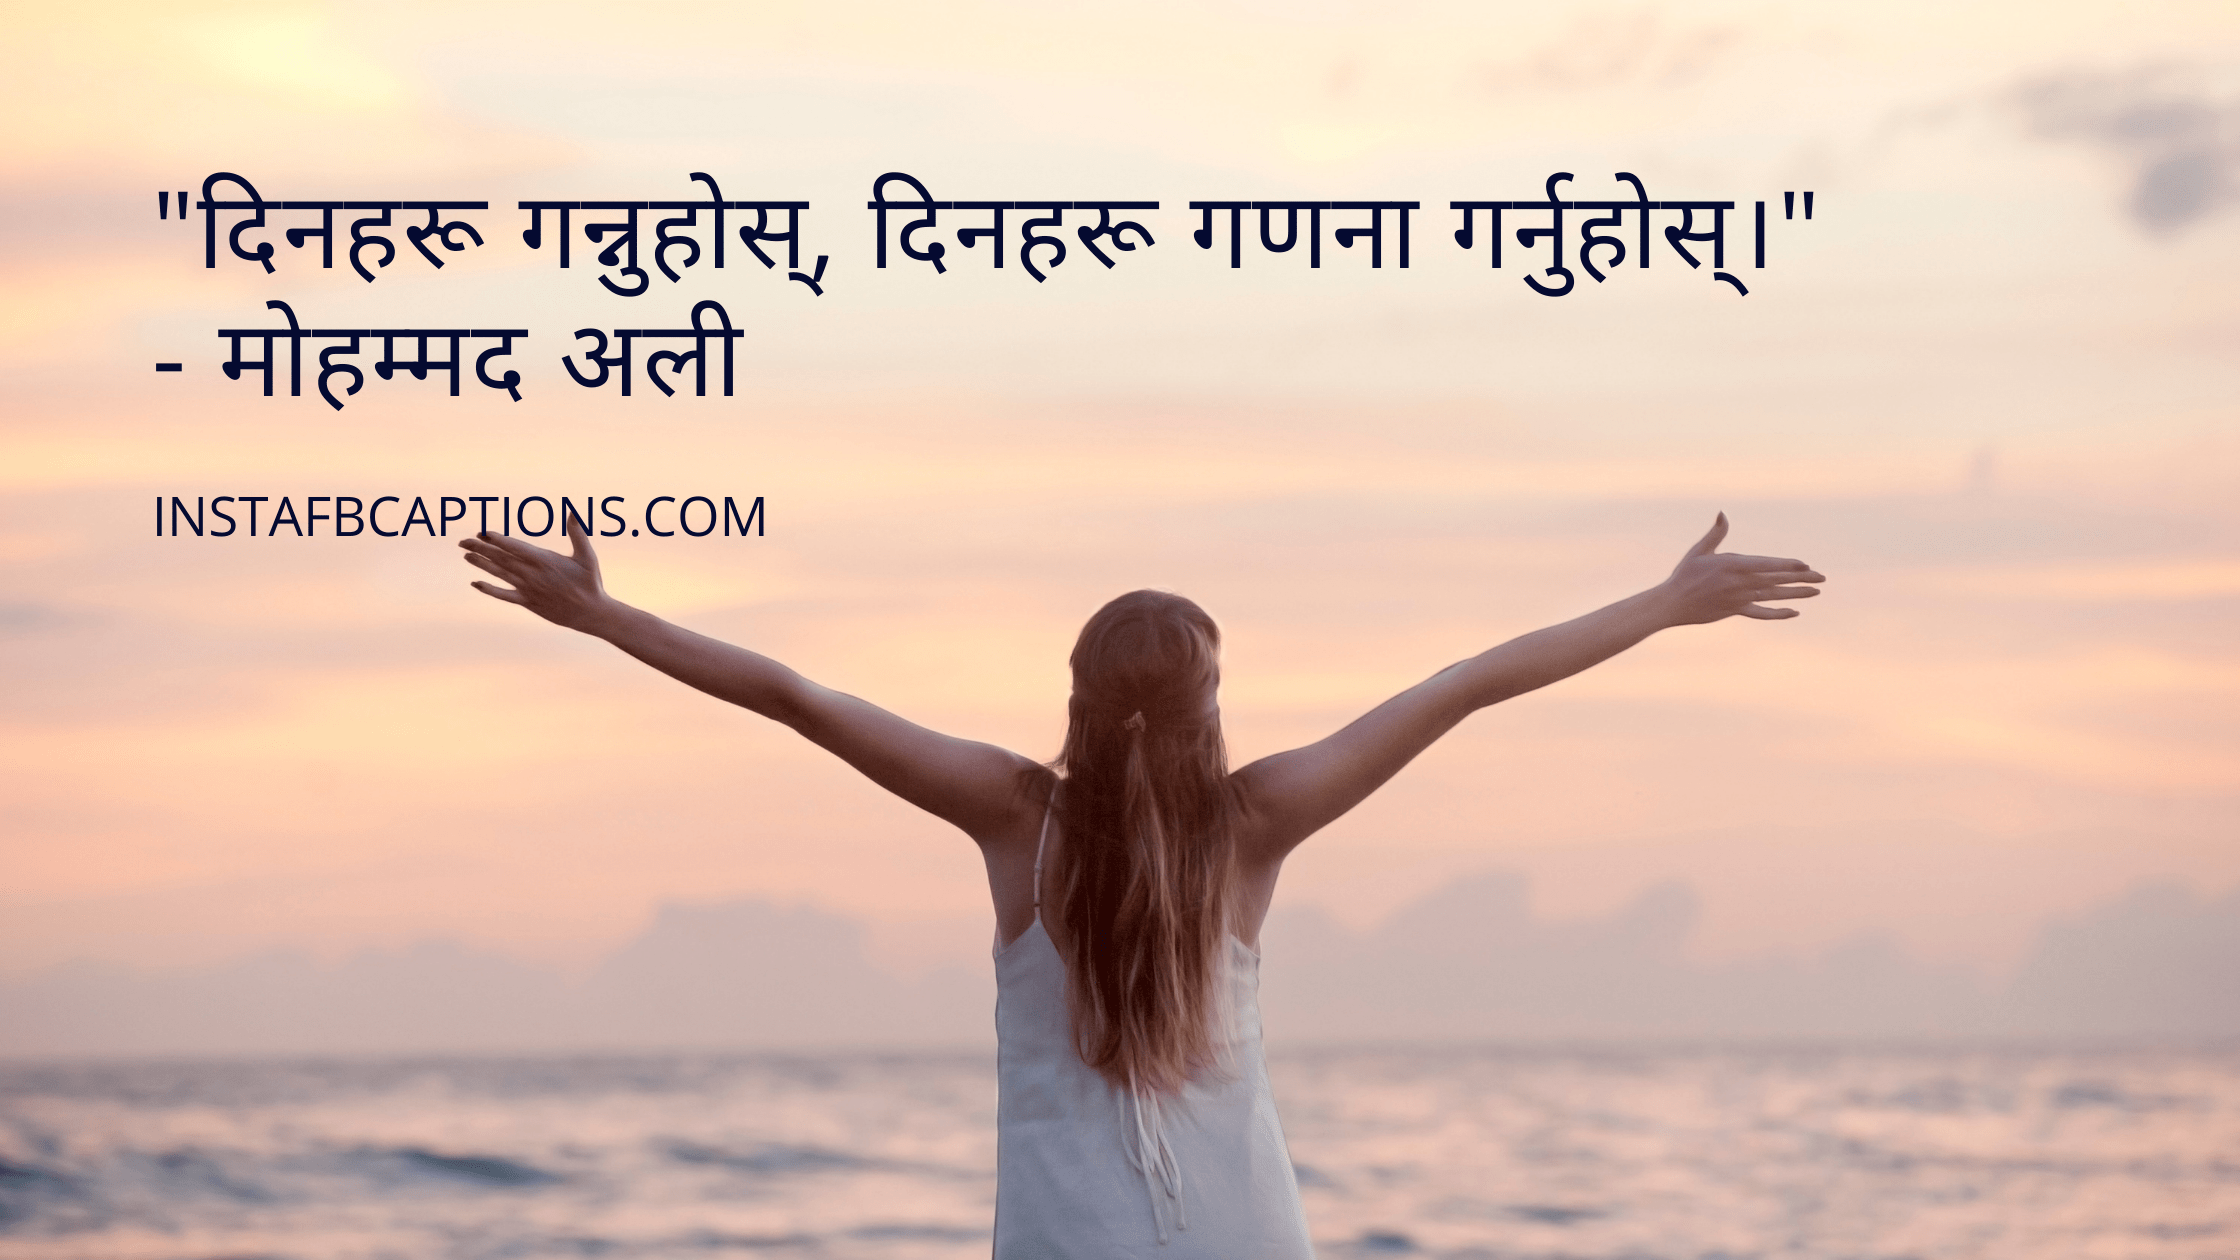 Motivational Nepali Quotes  - Motivational Nepali Quotes  - 99+ Instagram Captions in NEPALI in 2022